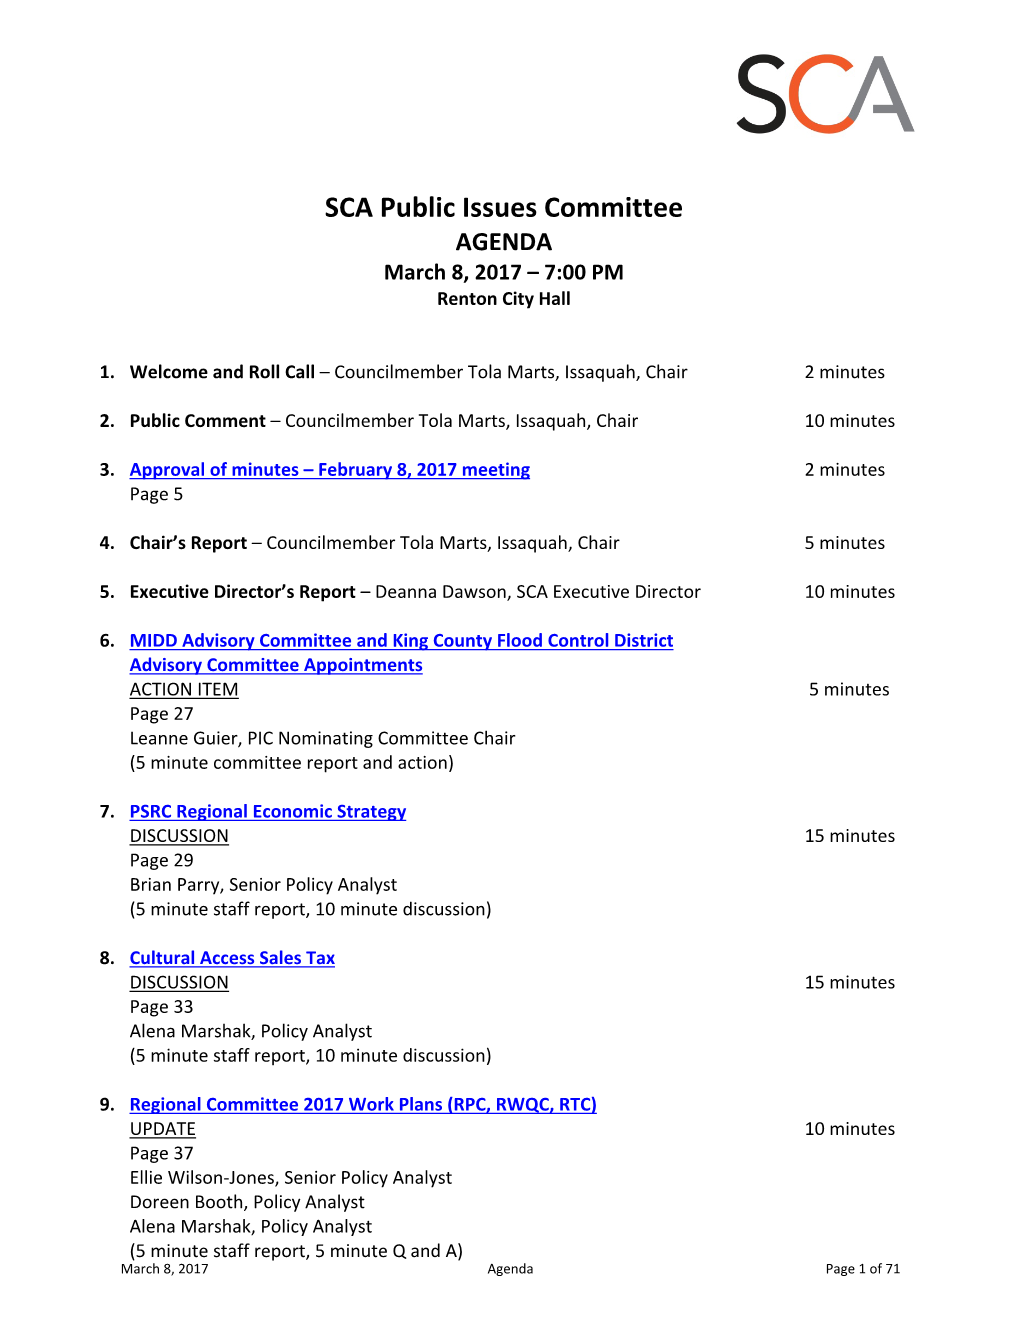 PIC Packet As Well As Additional Bills Relevant to SCA’S 2017 Legislative Agenda